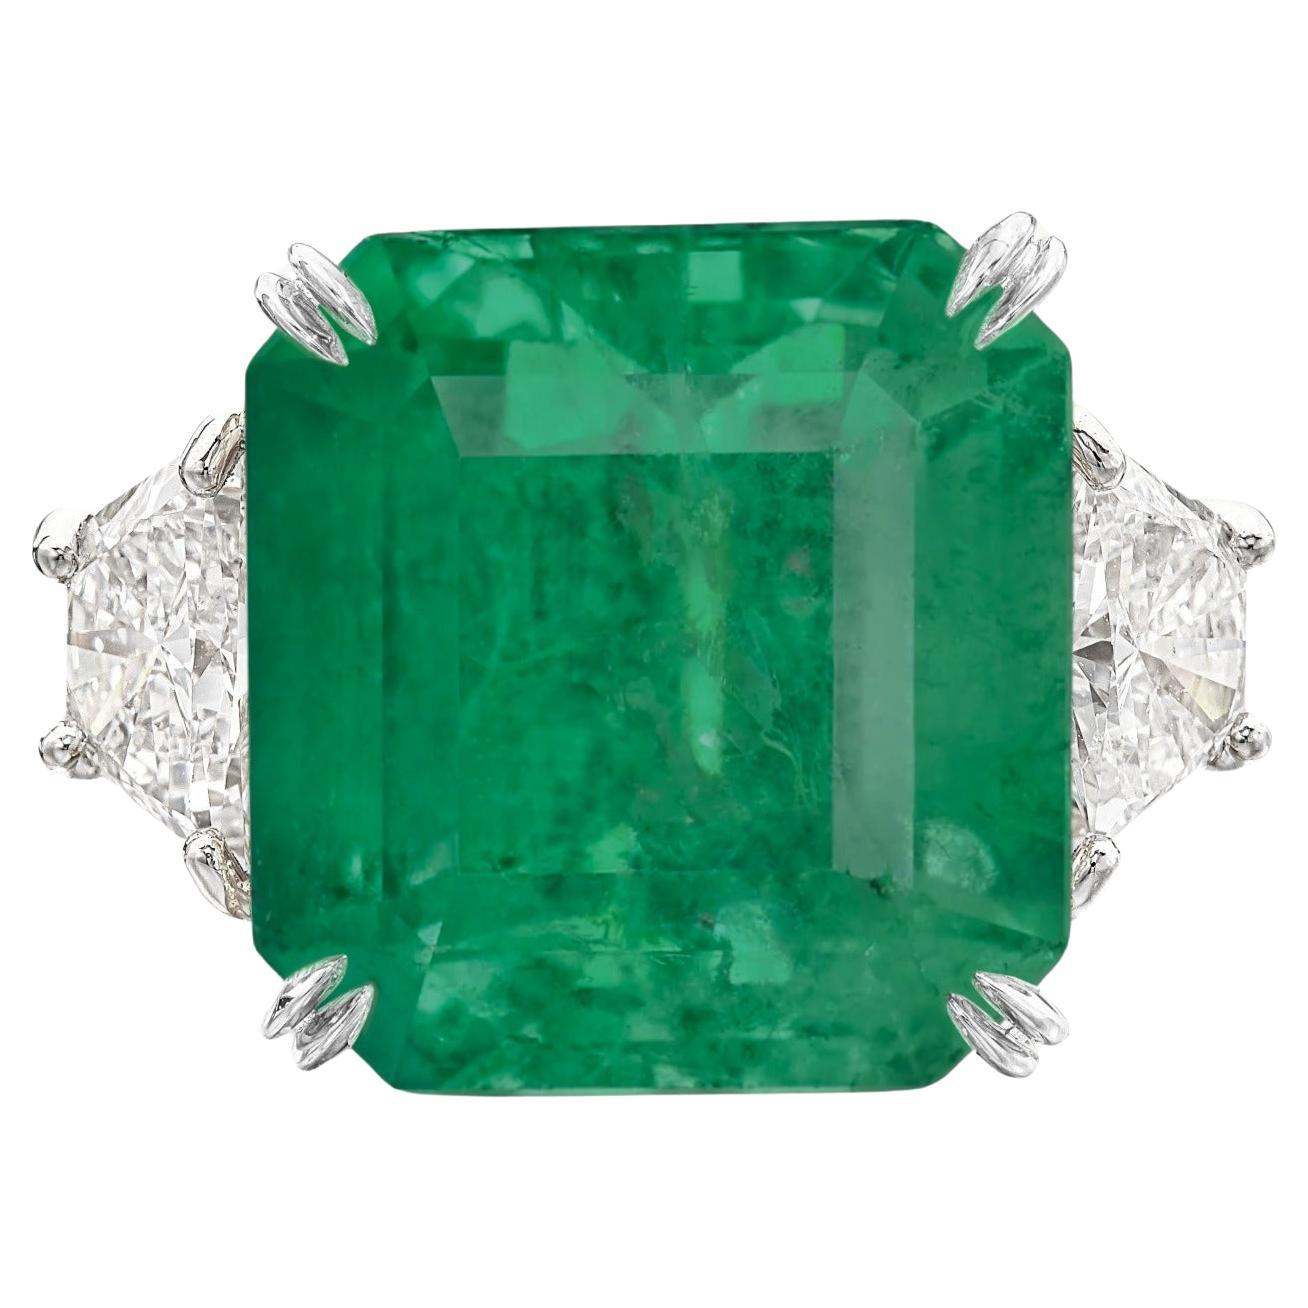 An exquisite and very large 6 carat green emerald set with two side trapezoid diamonds with a total weight of 7 carats 

the side diamonds are very high quality as well F color VS/VVS clarity

the ring has been set in solid 18 carats white gold

the